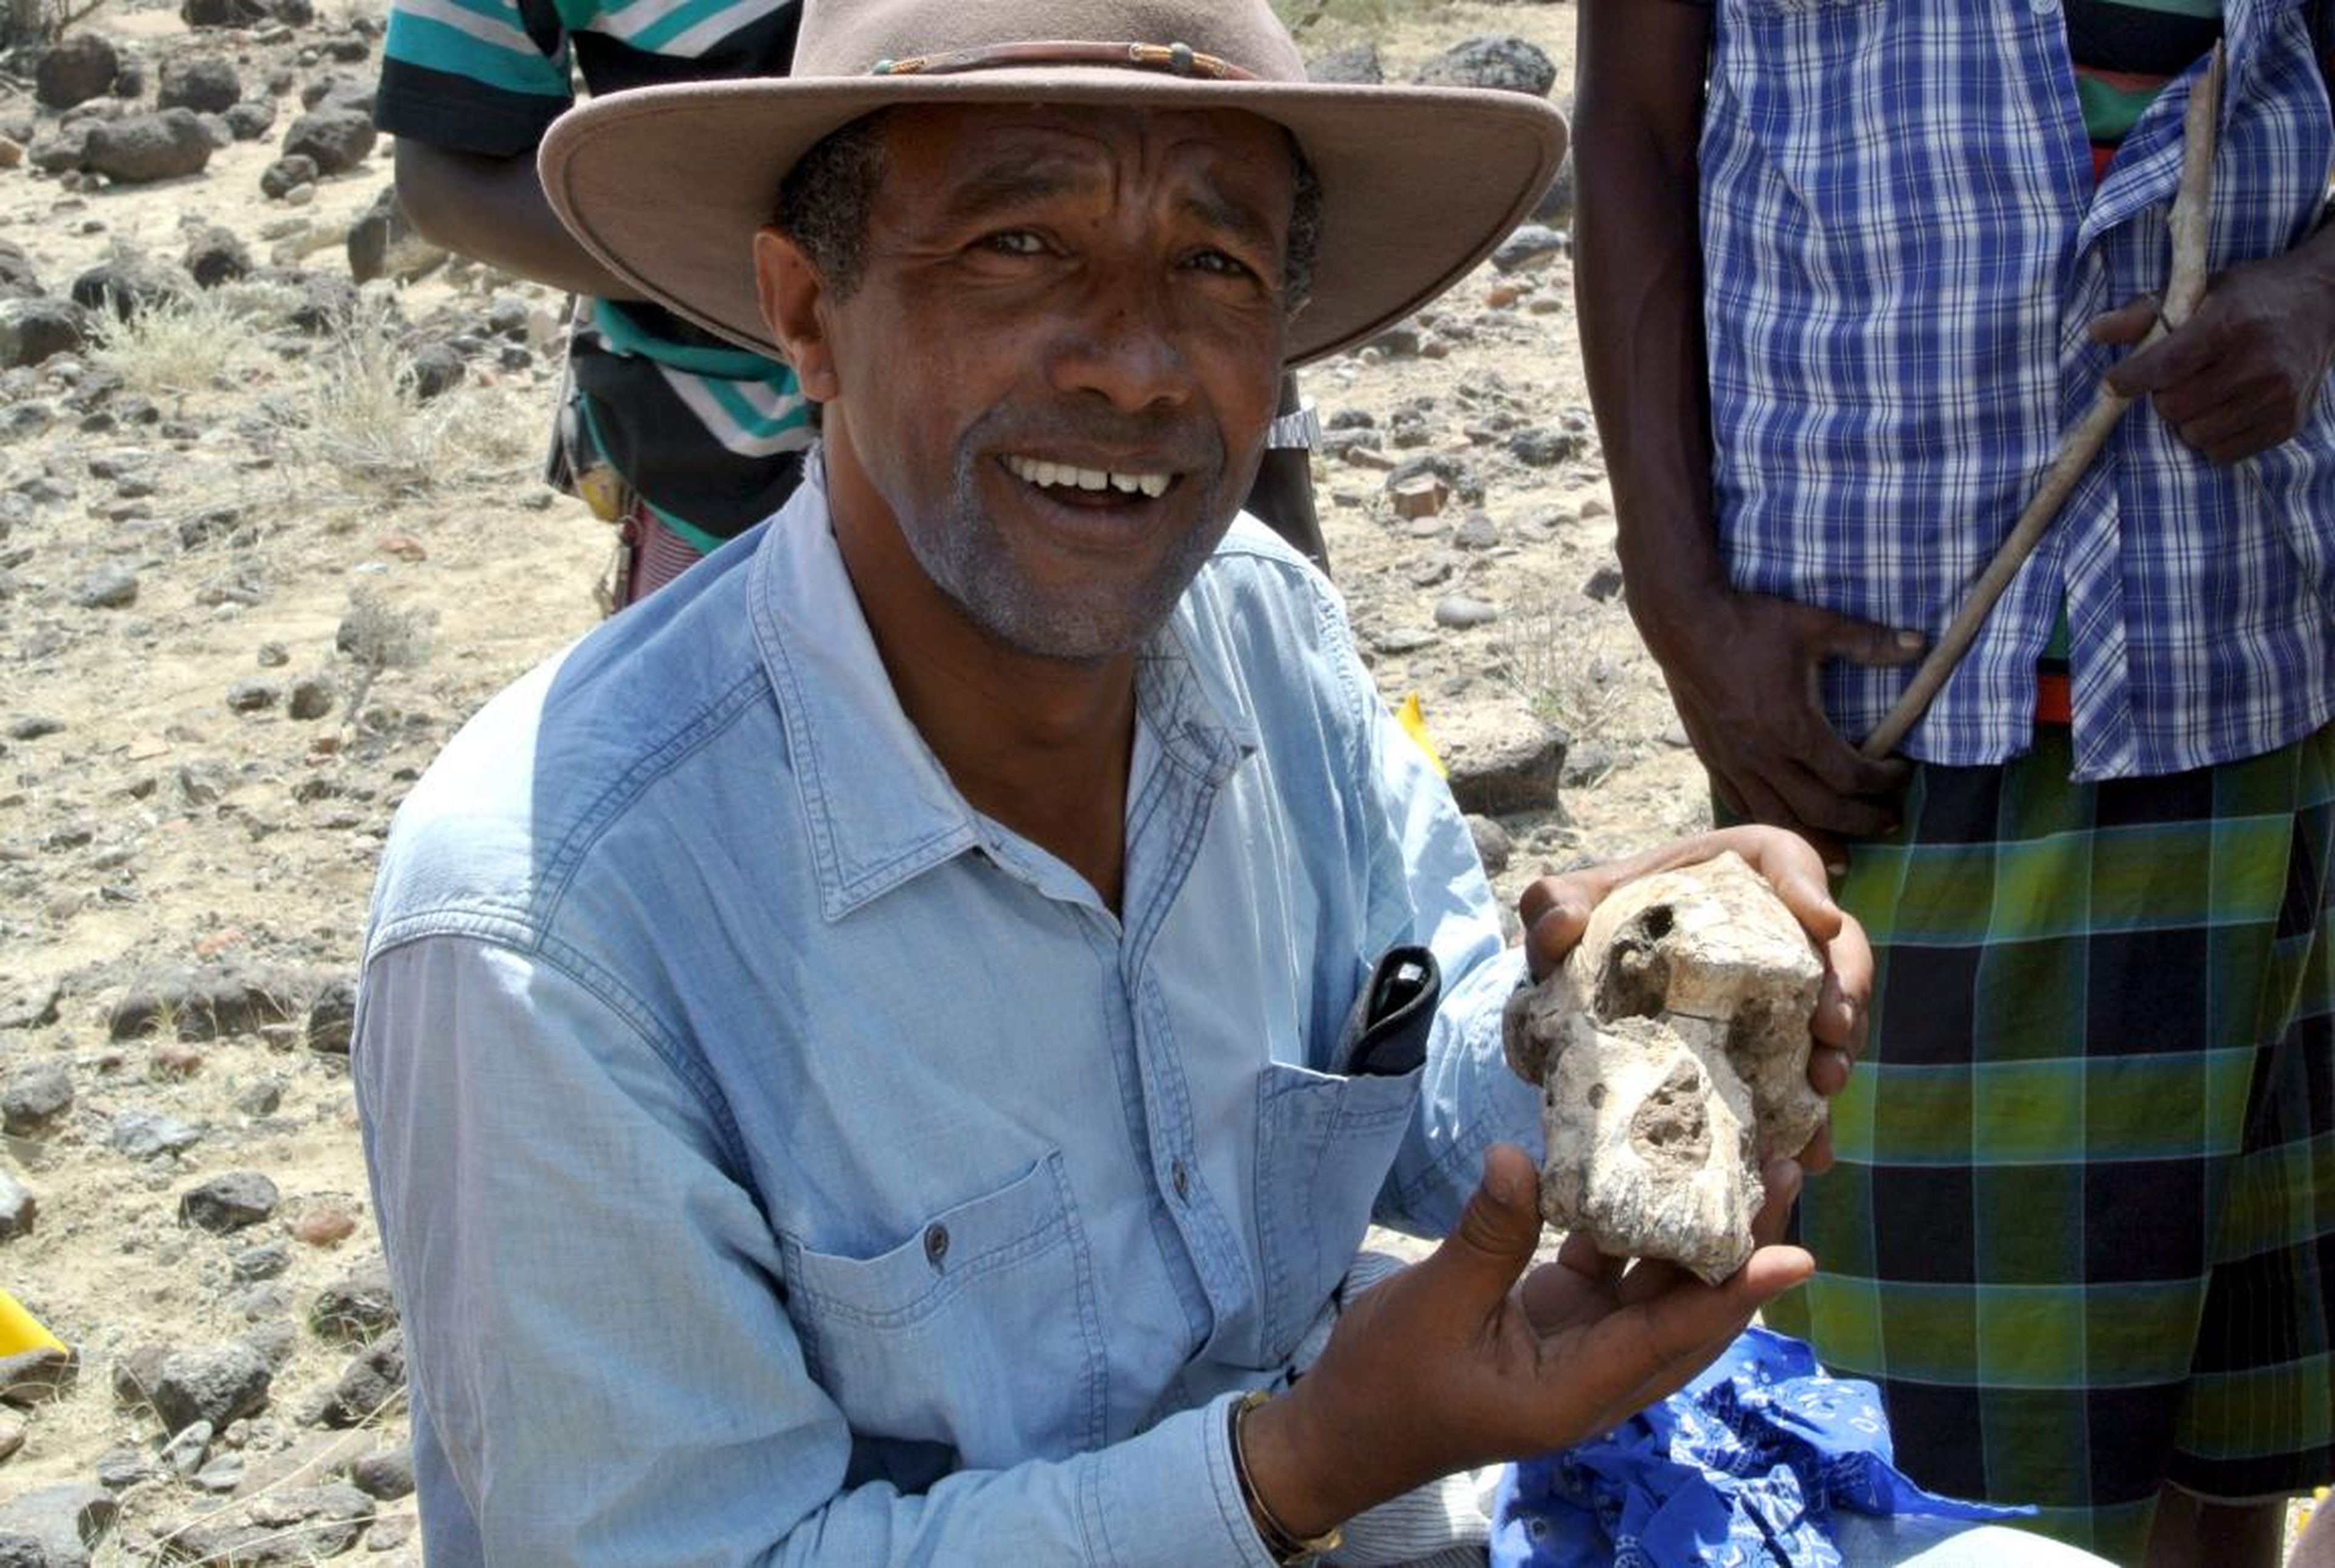 Anthropologist Yohannes Haile-Selassie holds the Australopithecus anamensis skull known as “MRD.”